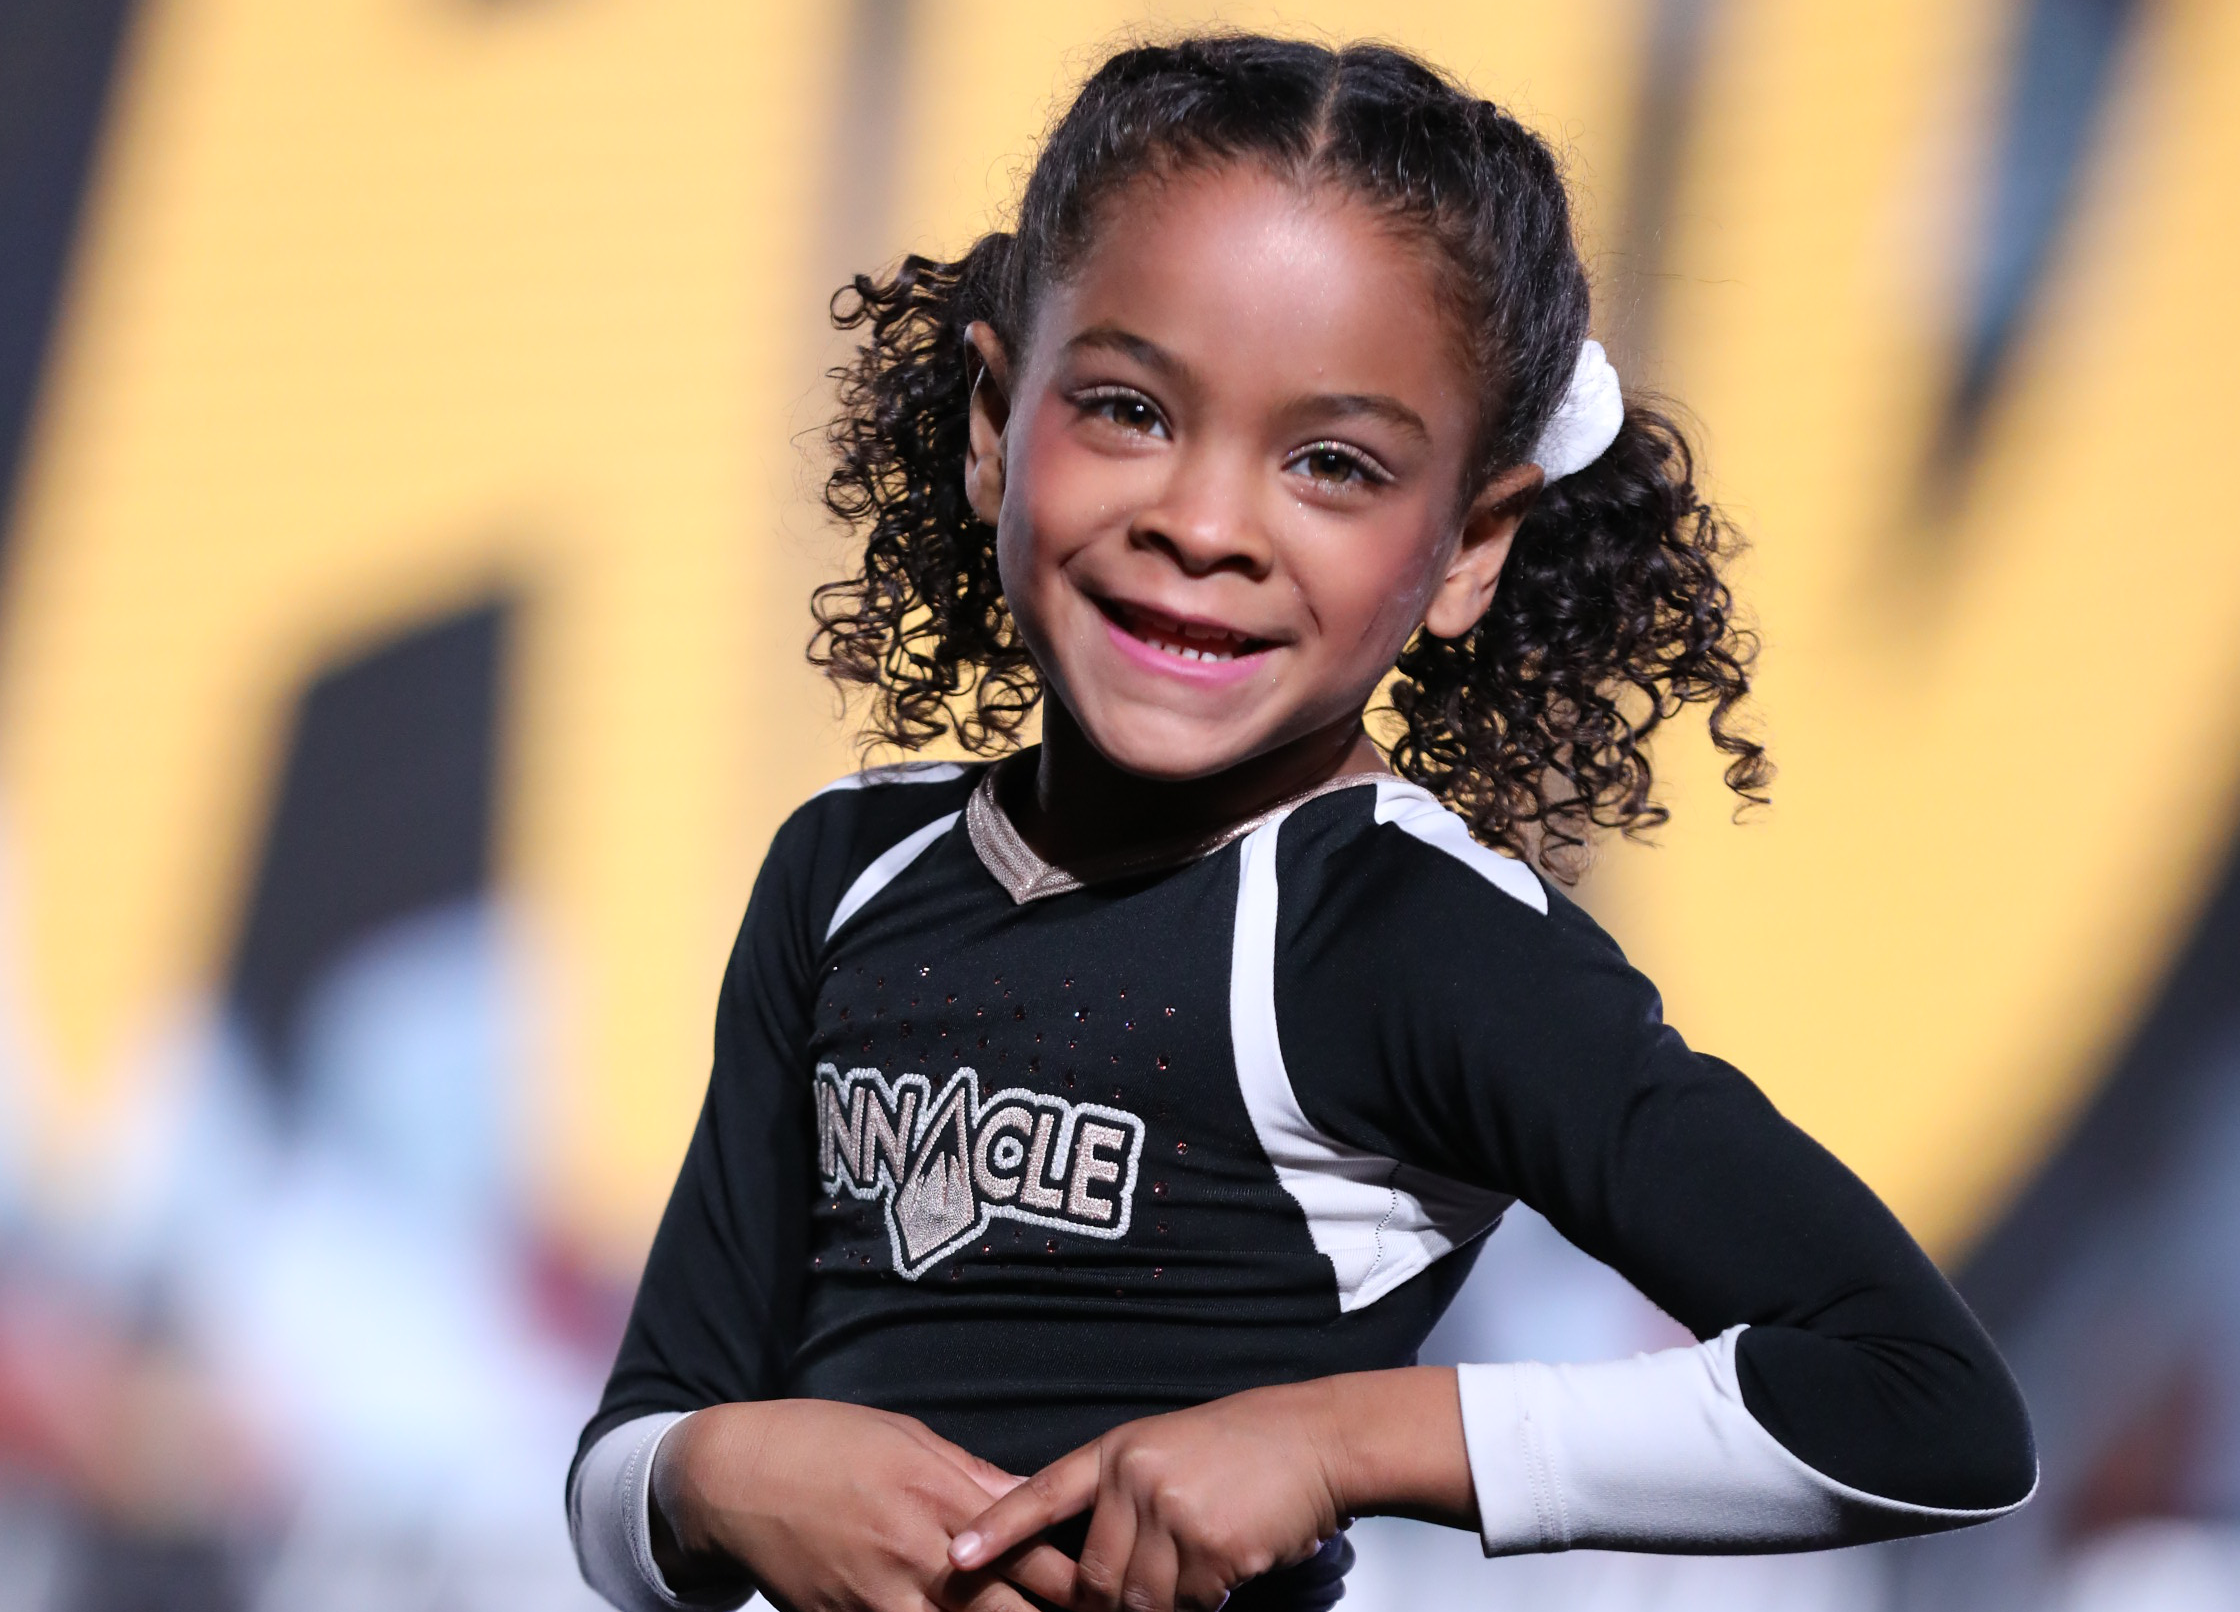 Youth cheerleader smiles at the camera during a performance